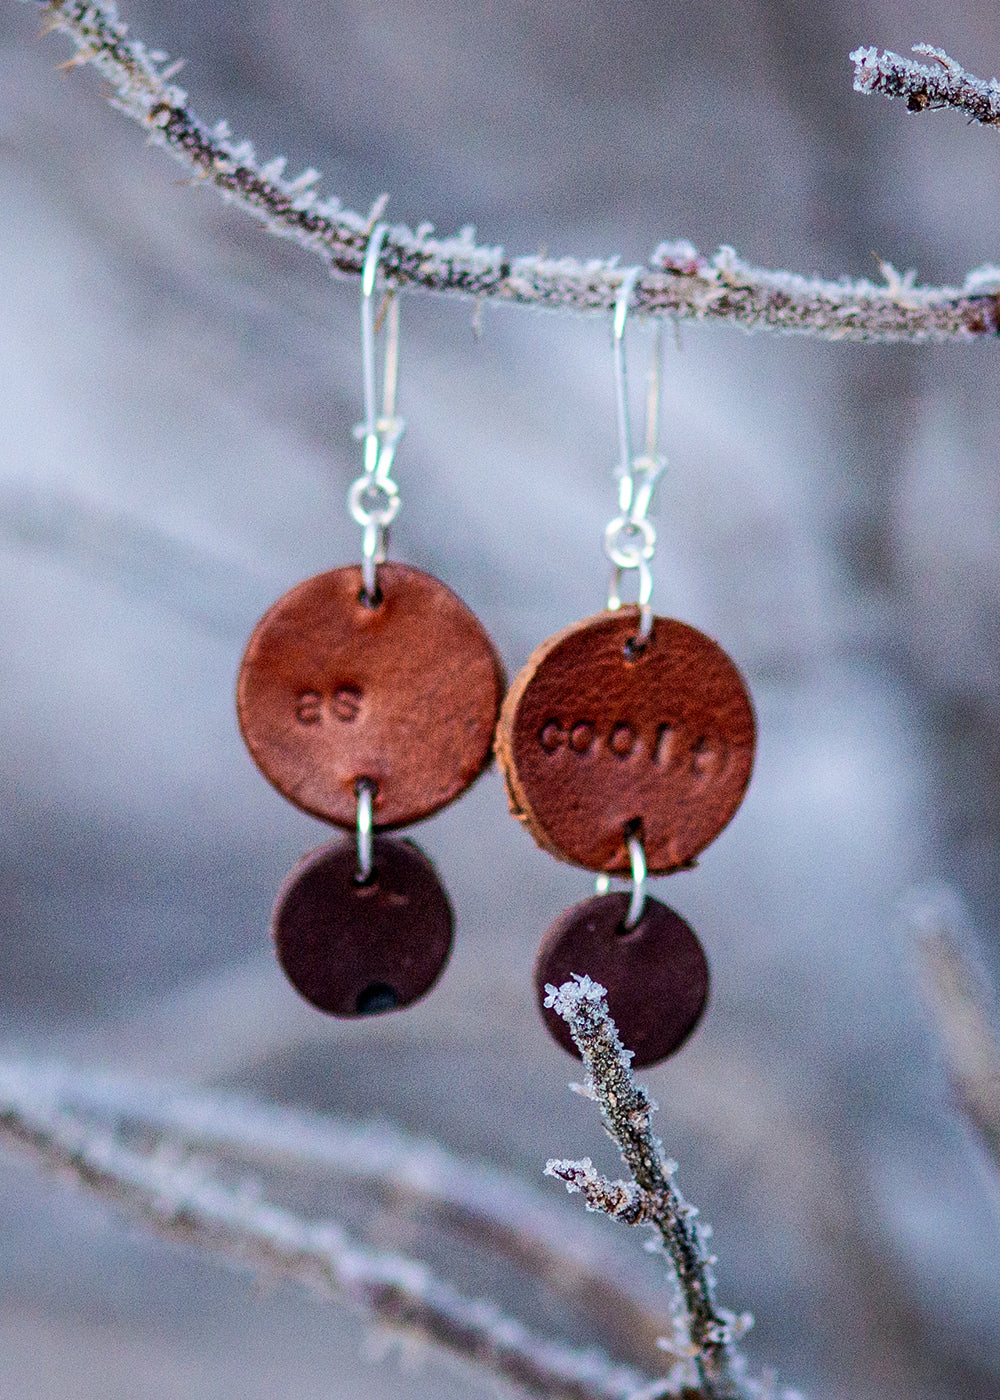 Light weight leather earrings "as coolt"